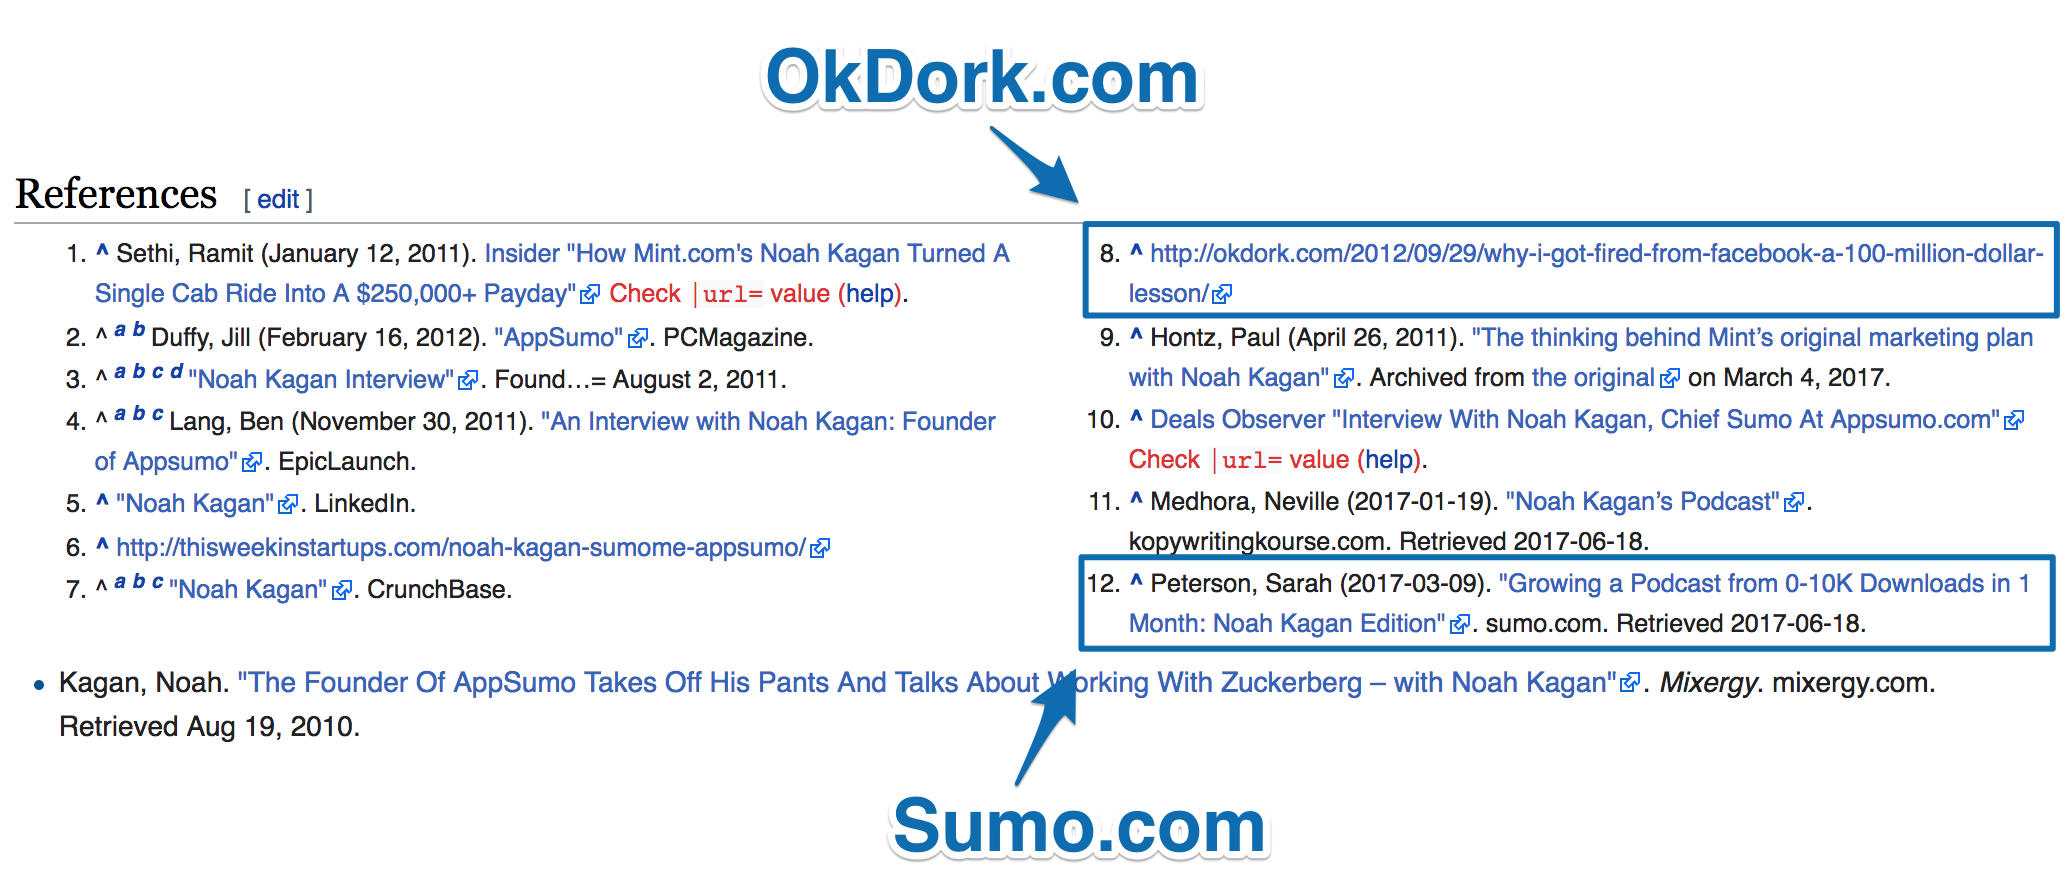 Screenshot showing okdork.com and sumo.com being futured on wikipedia references